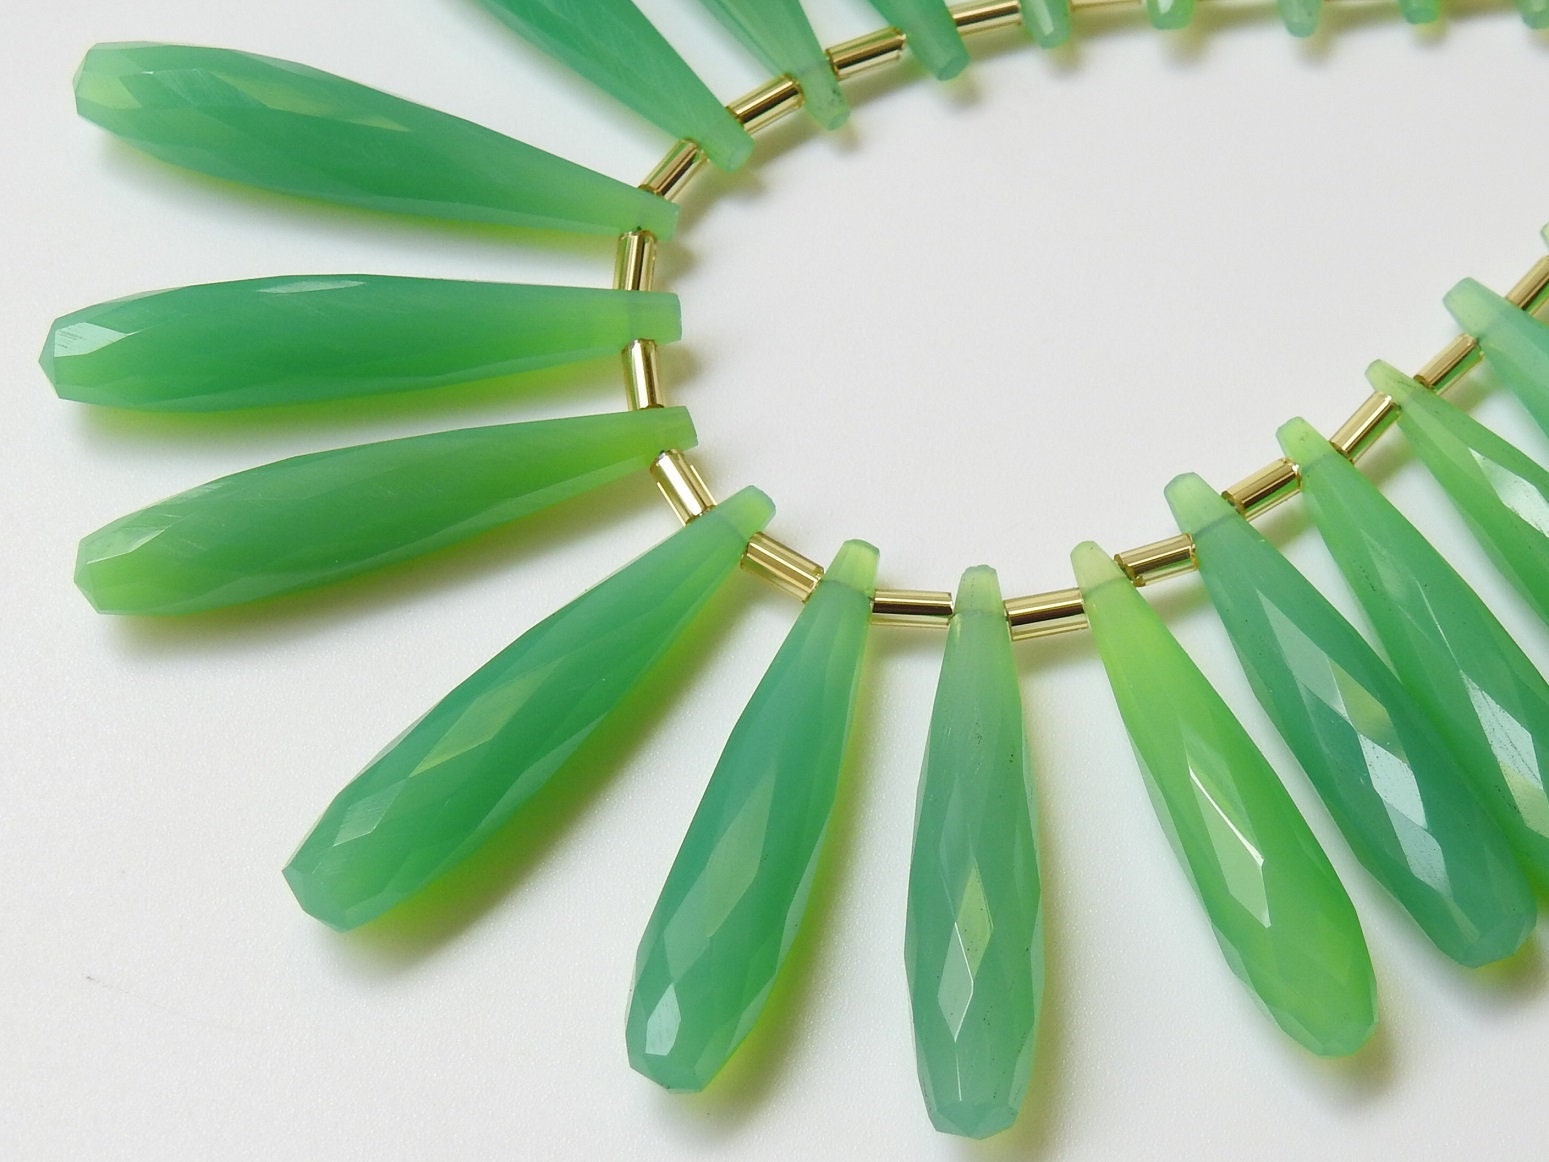 Chrysoprase Green Chalcedony Elongated Drops,Faceted,Teardrop,Loose Stone,For Making Jewelry,Wholesaler,Supplies 35MM Long Approx PME-CY1 | Save 33% - Rajasthan Living 13